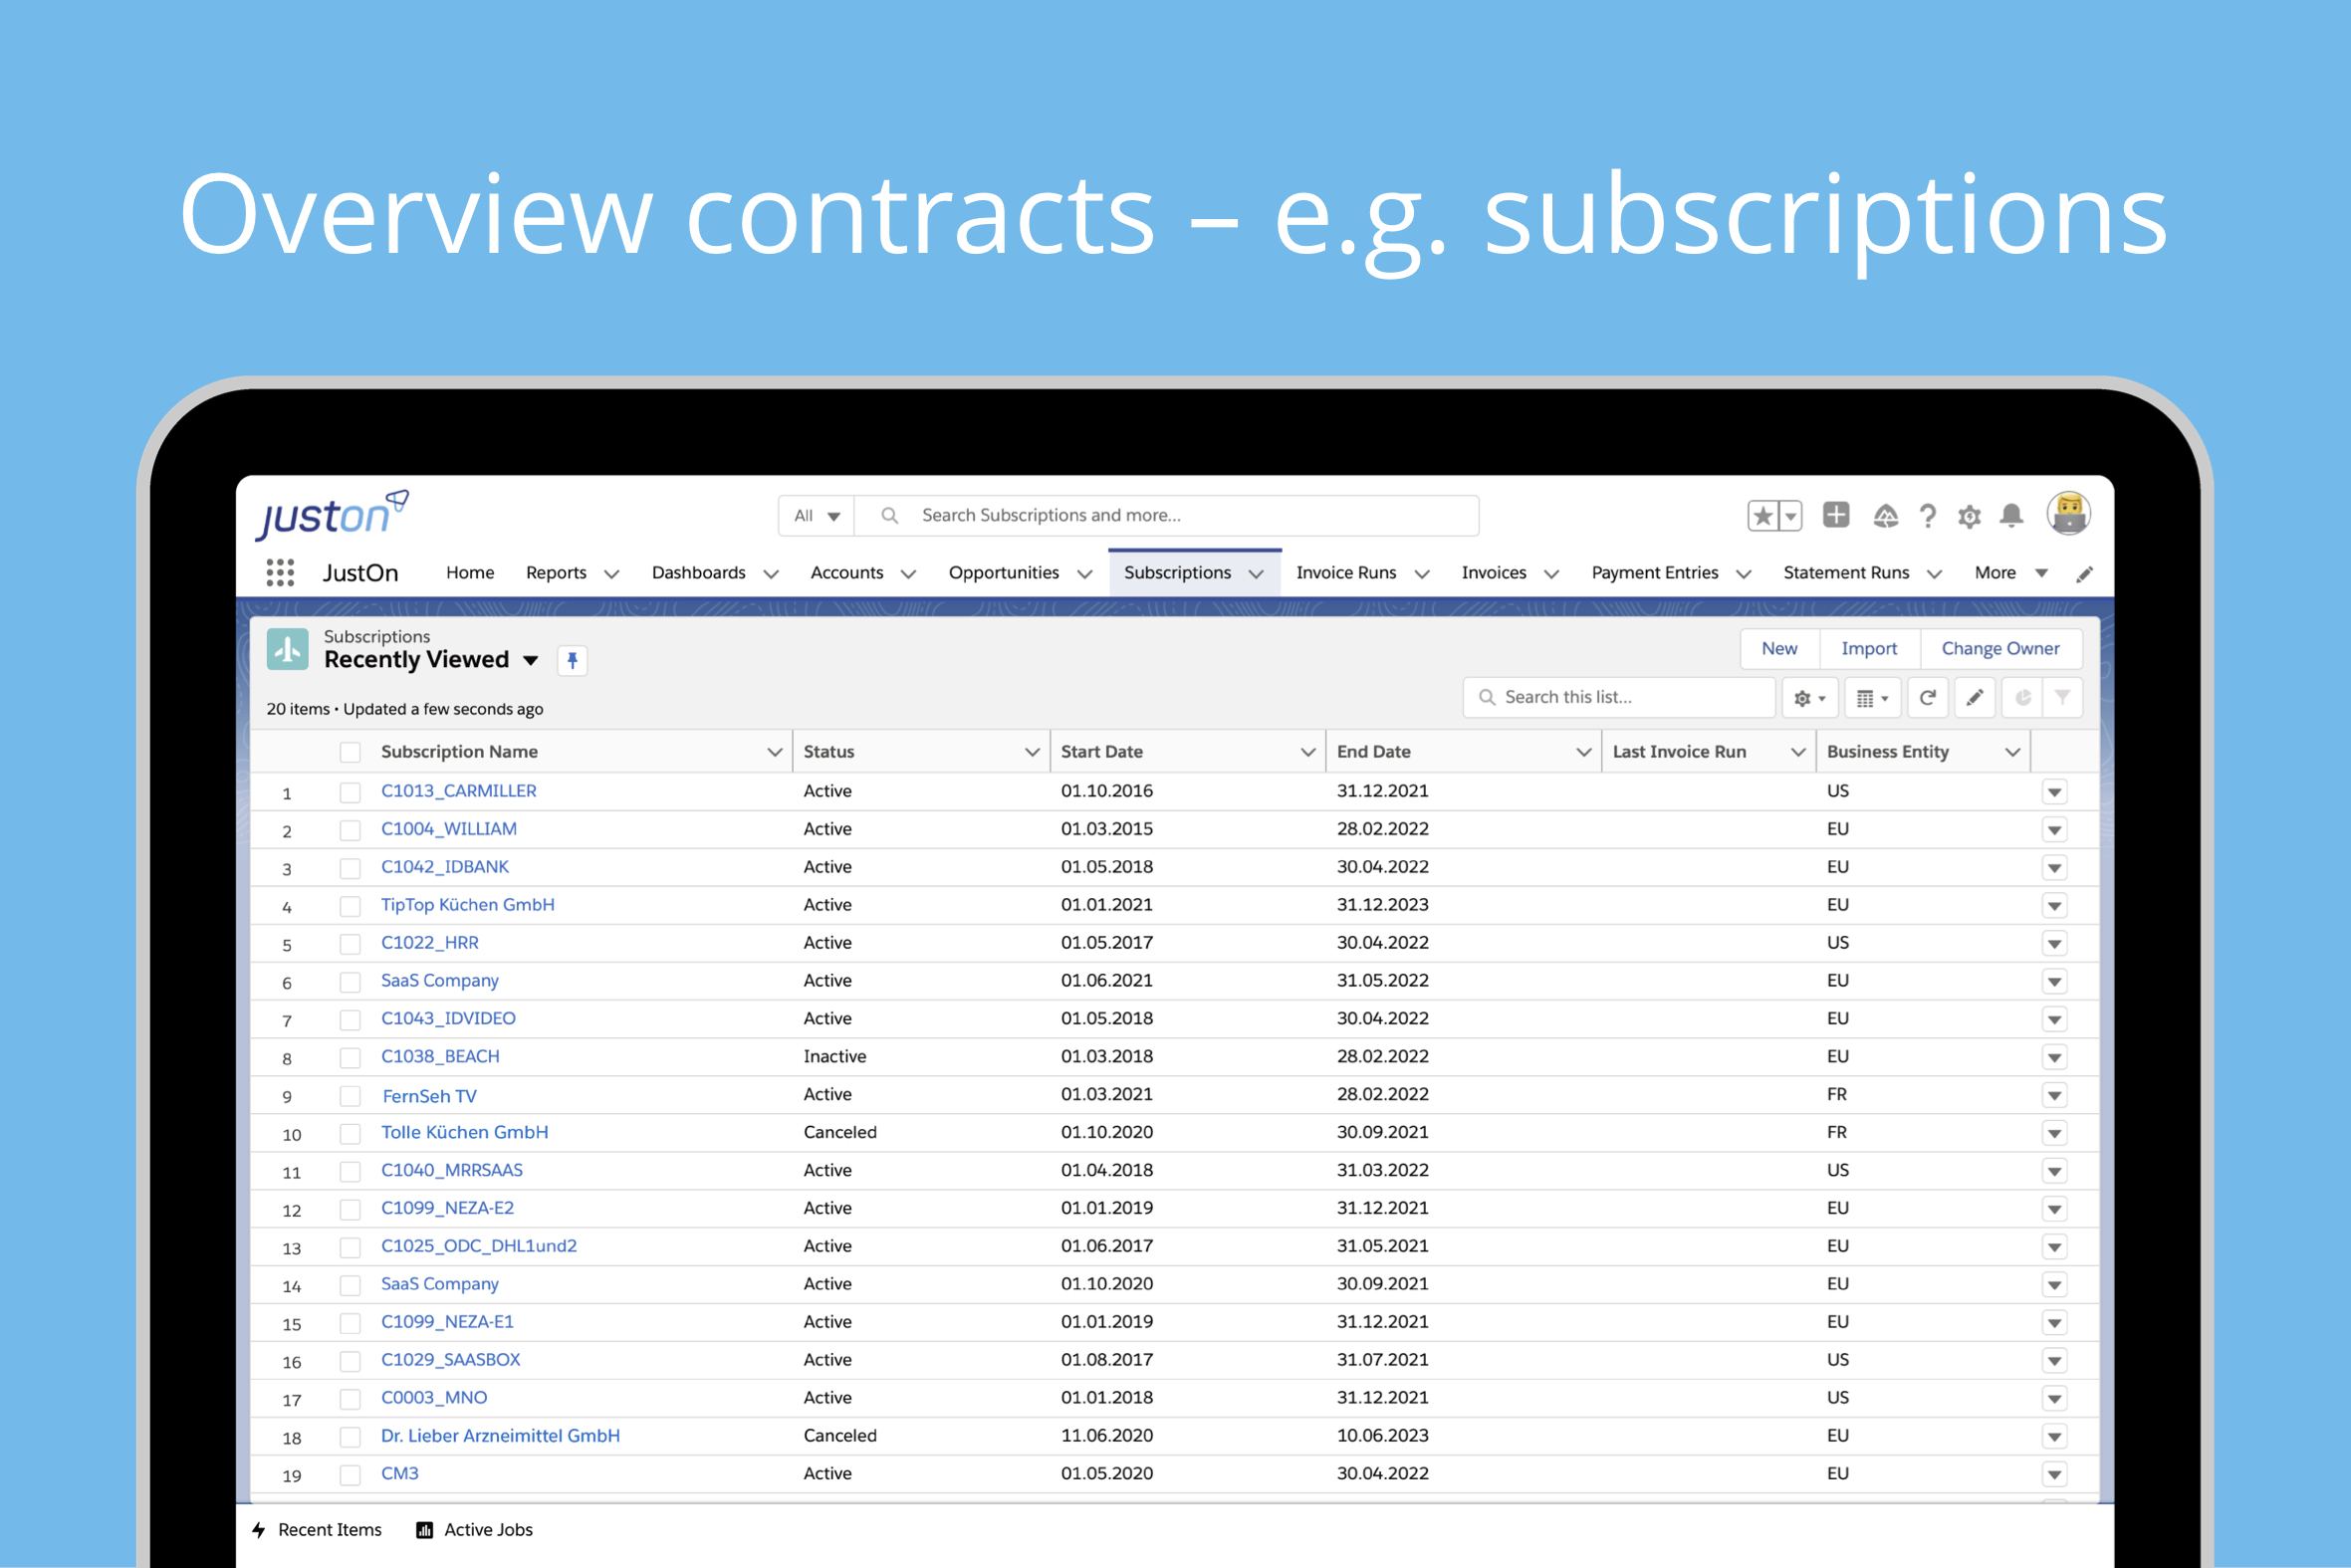 JustOn overview of contracts based on subscriptions, usage data and/or one-time services or products